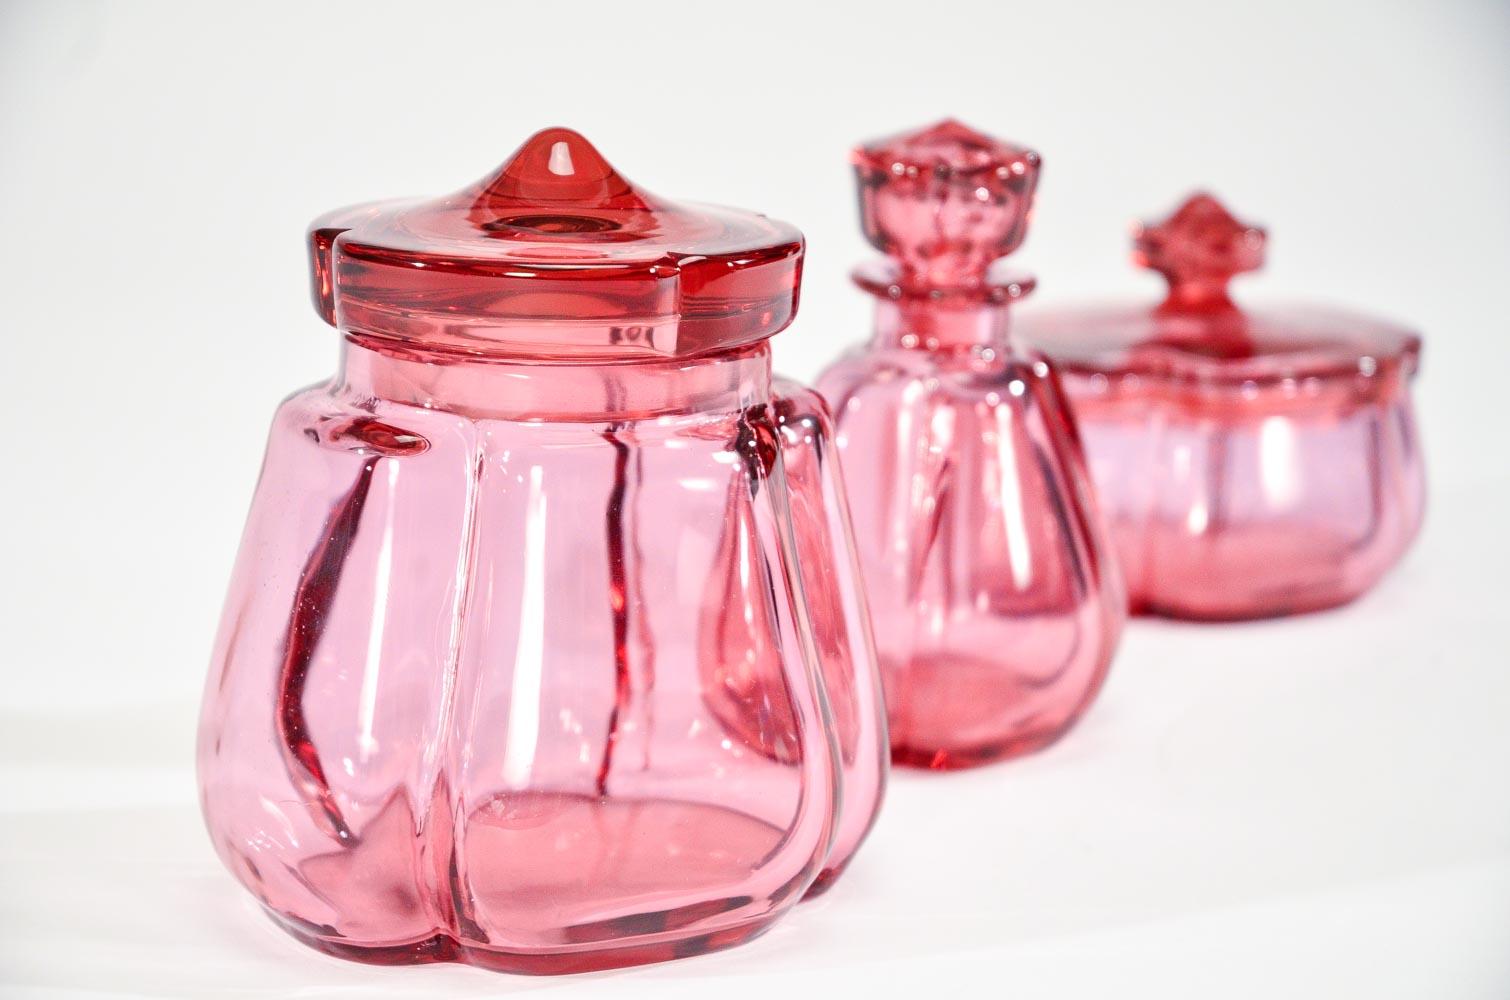 One of Moser's iconic named colors, this signed 3-piece dresser set is hand blown crystal in 